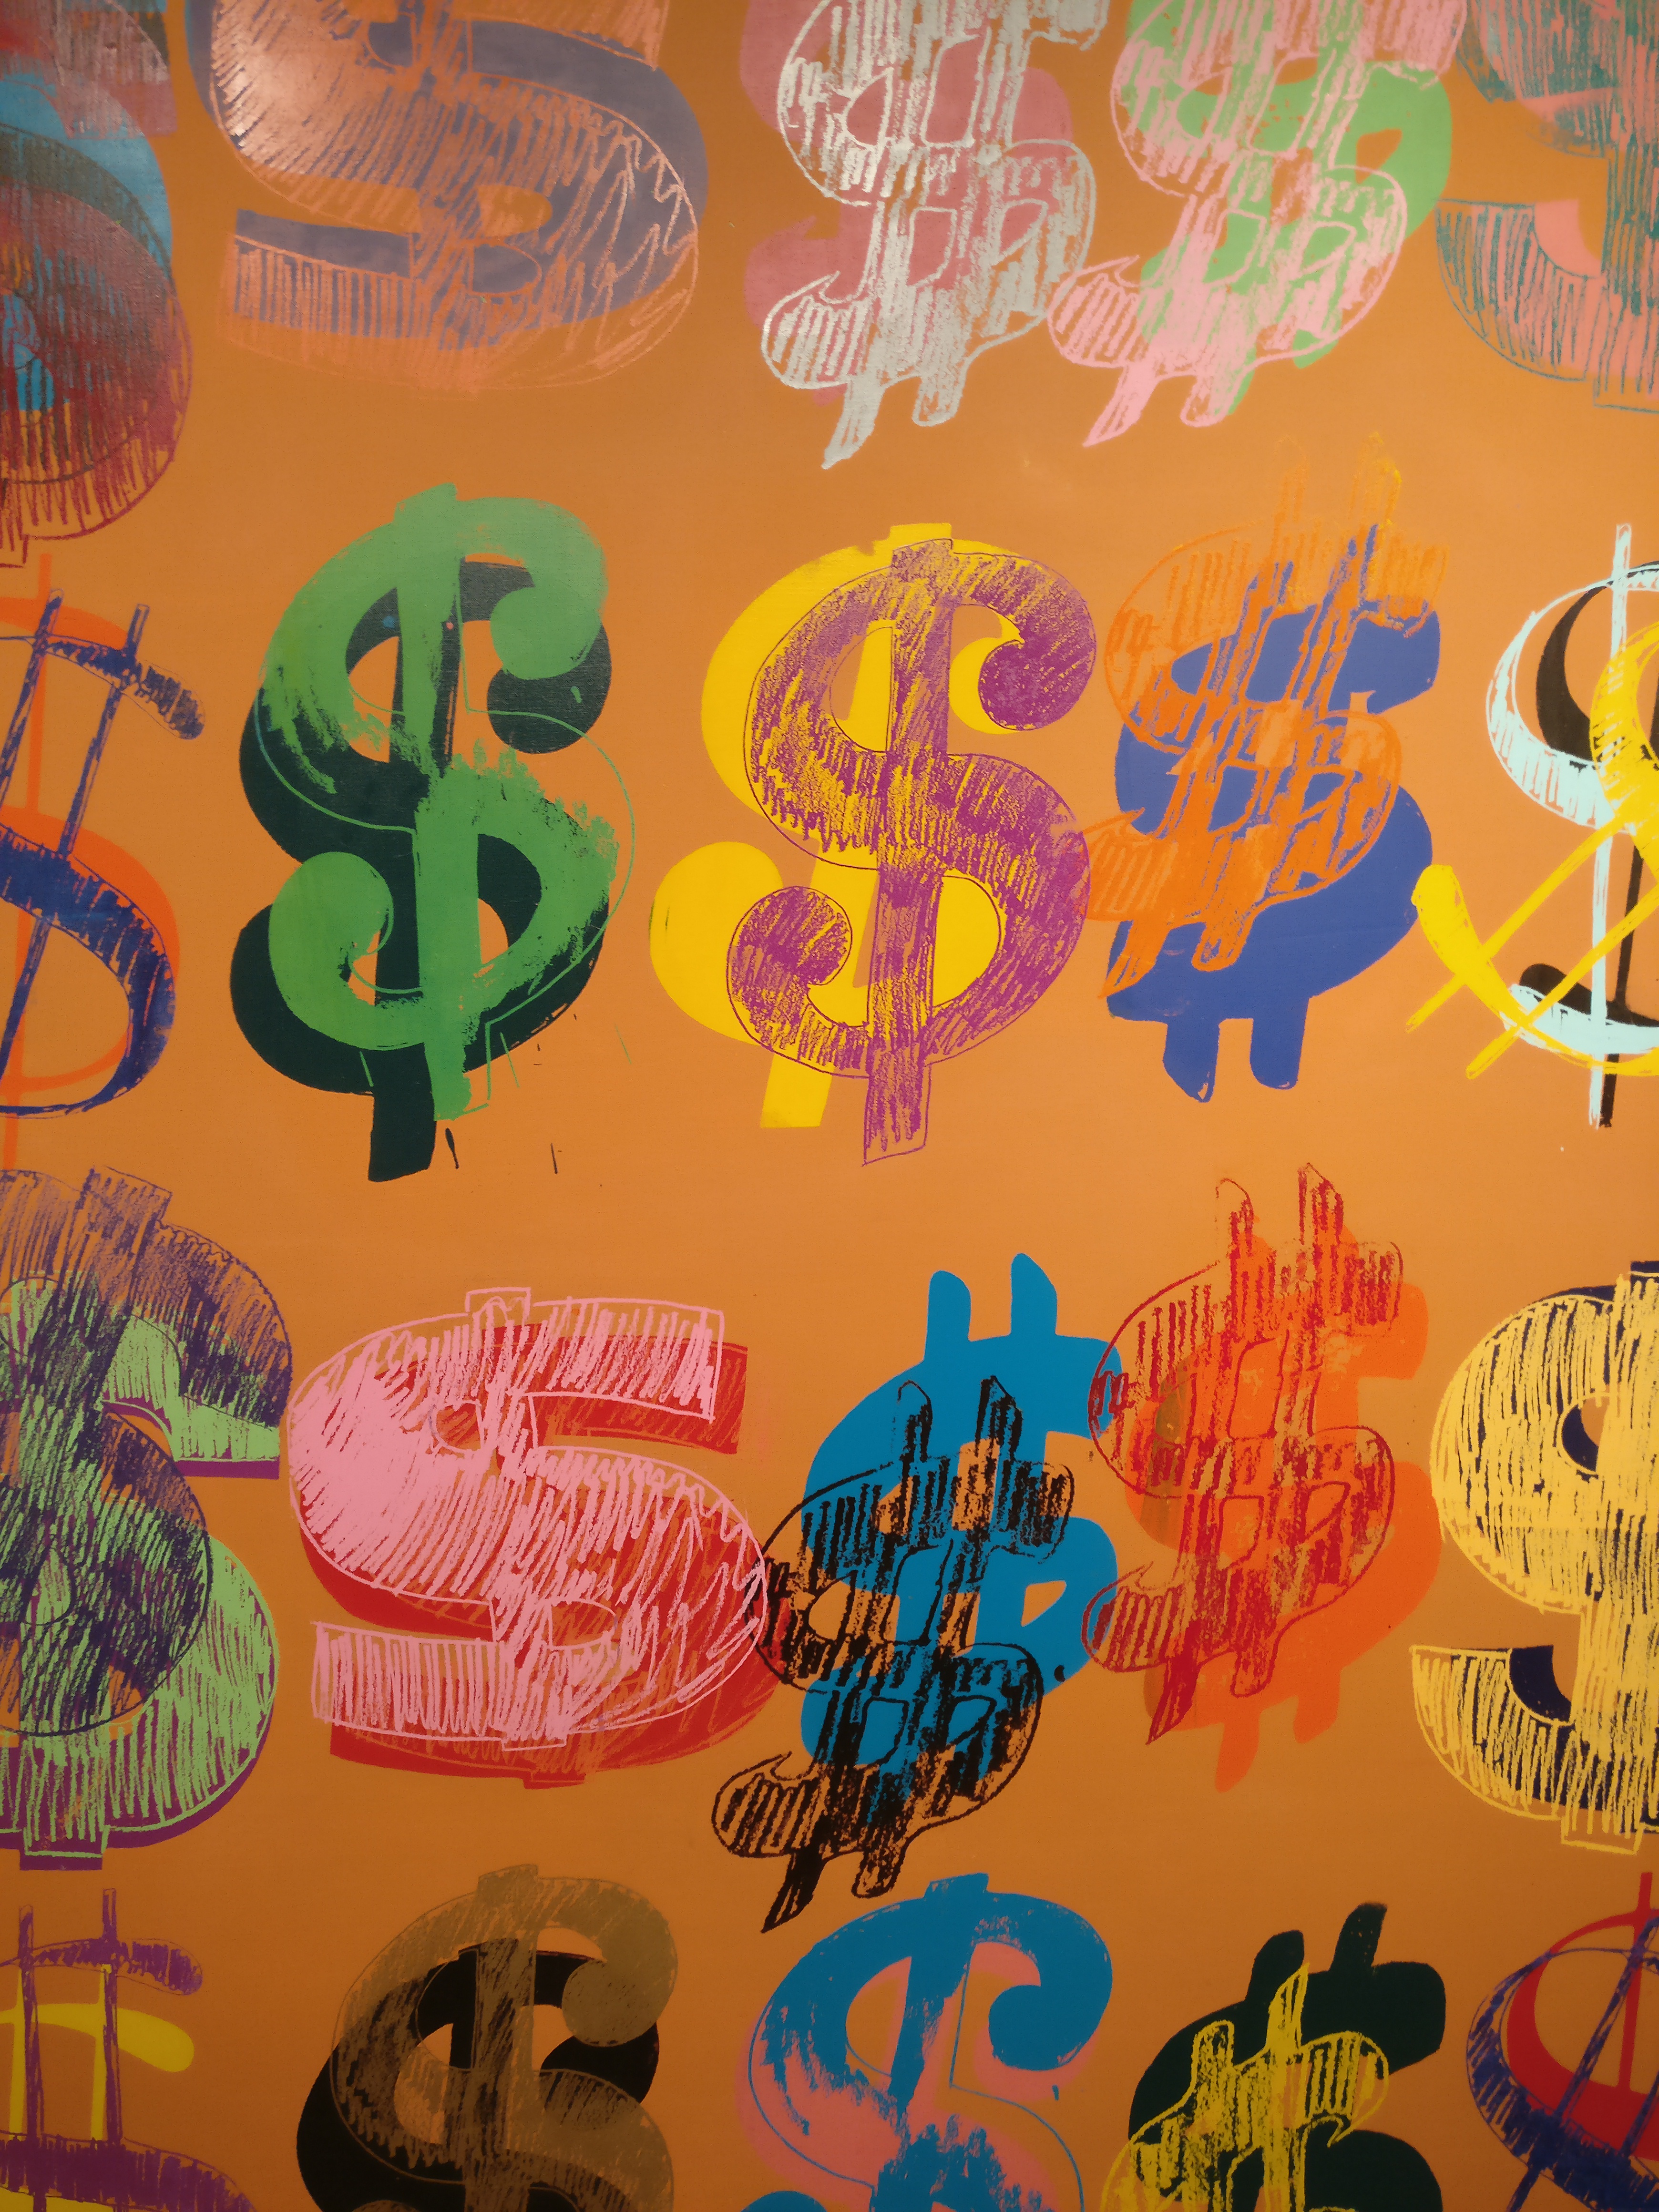 Photo of an Andy Warhol painting with an orange background and dollar symbols